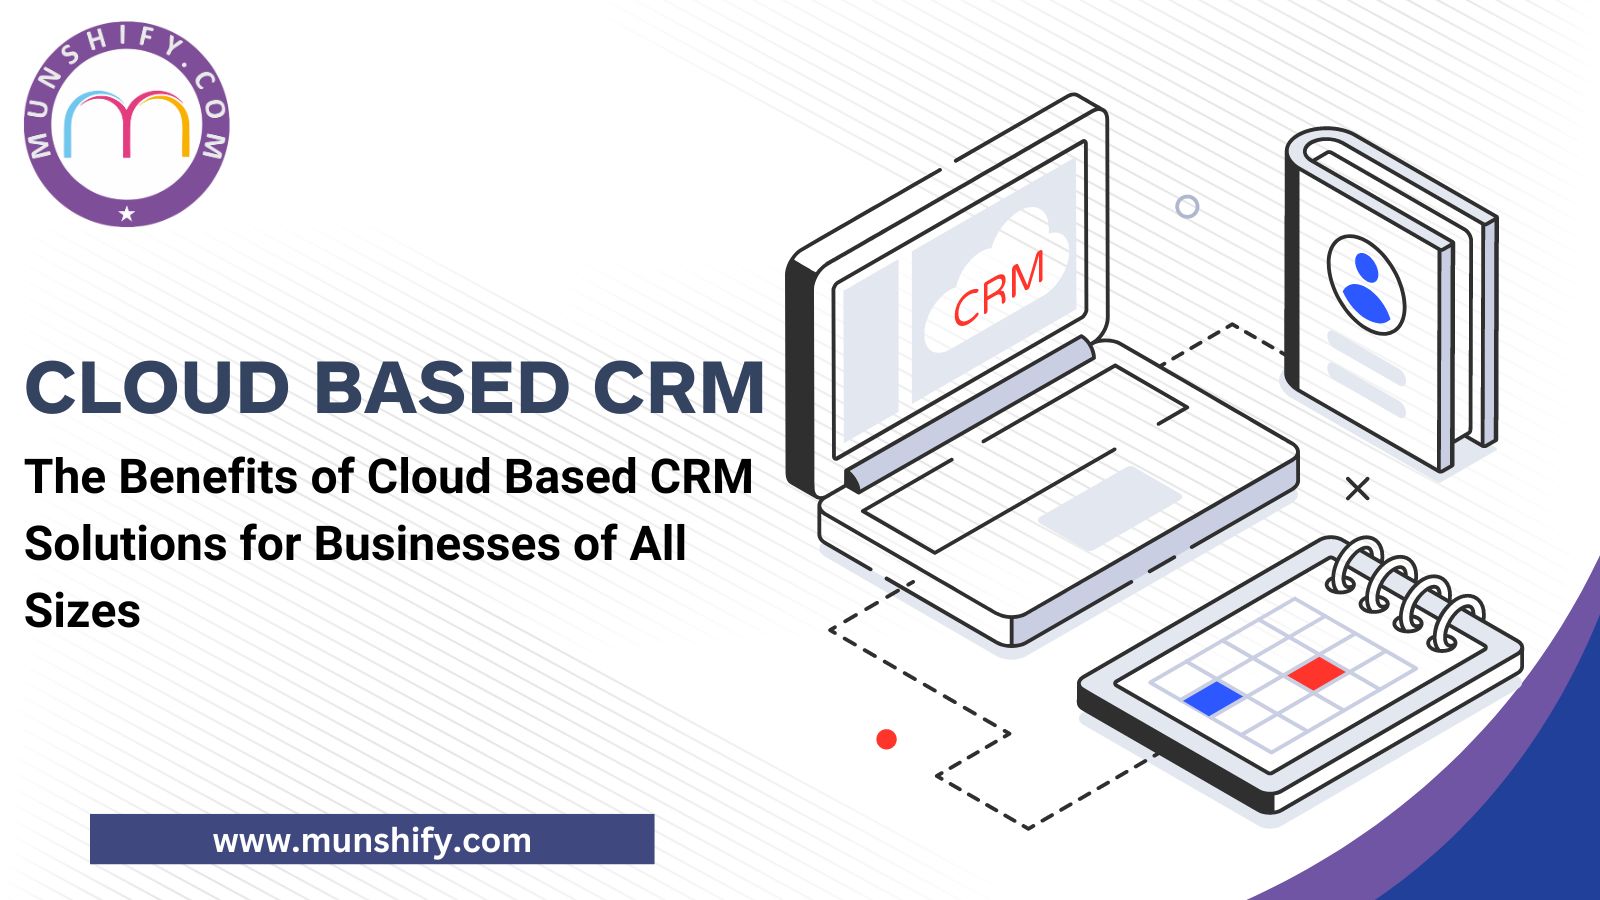 The Benefits of Cloud Based CRM Solutions for Businesses of All Sizes 